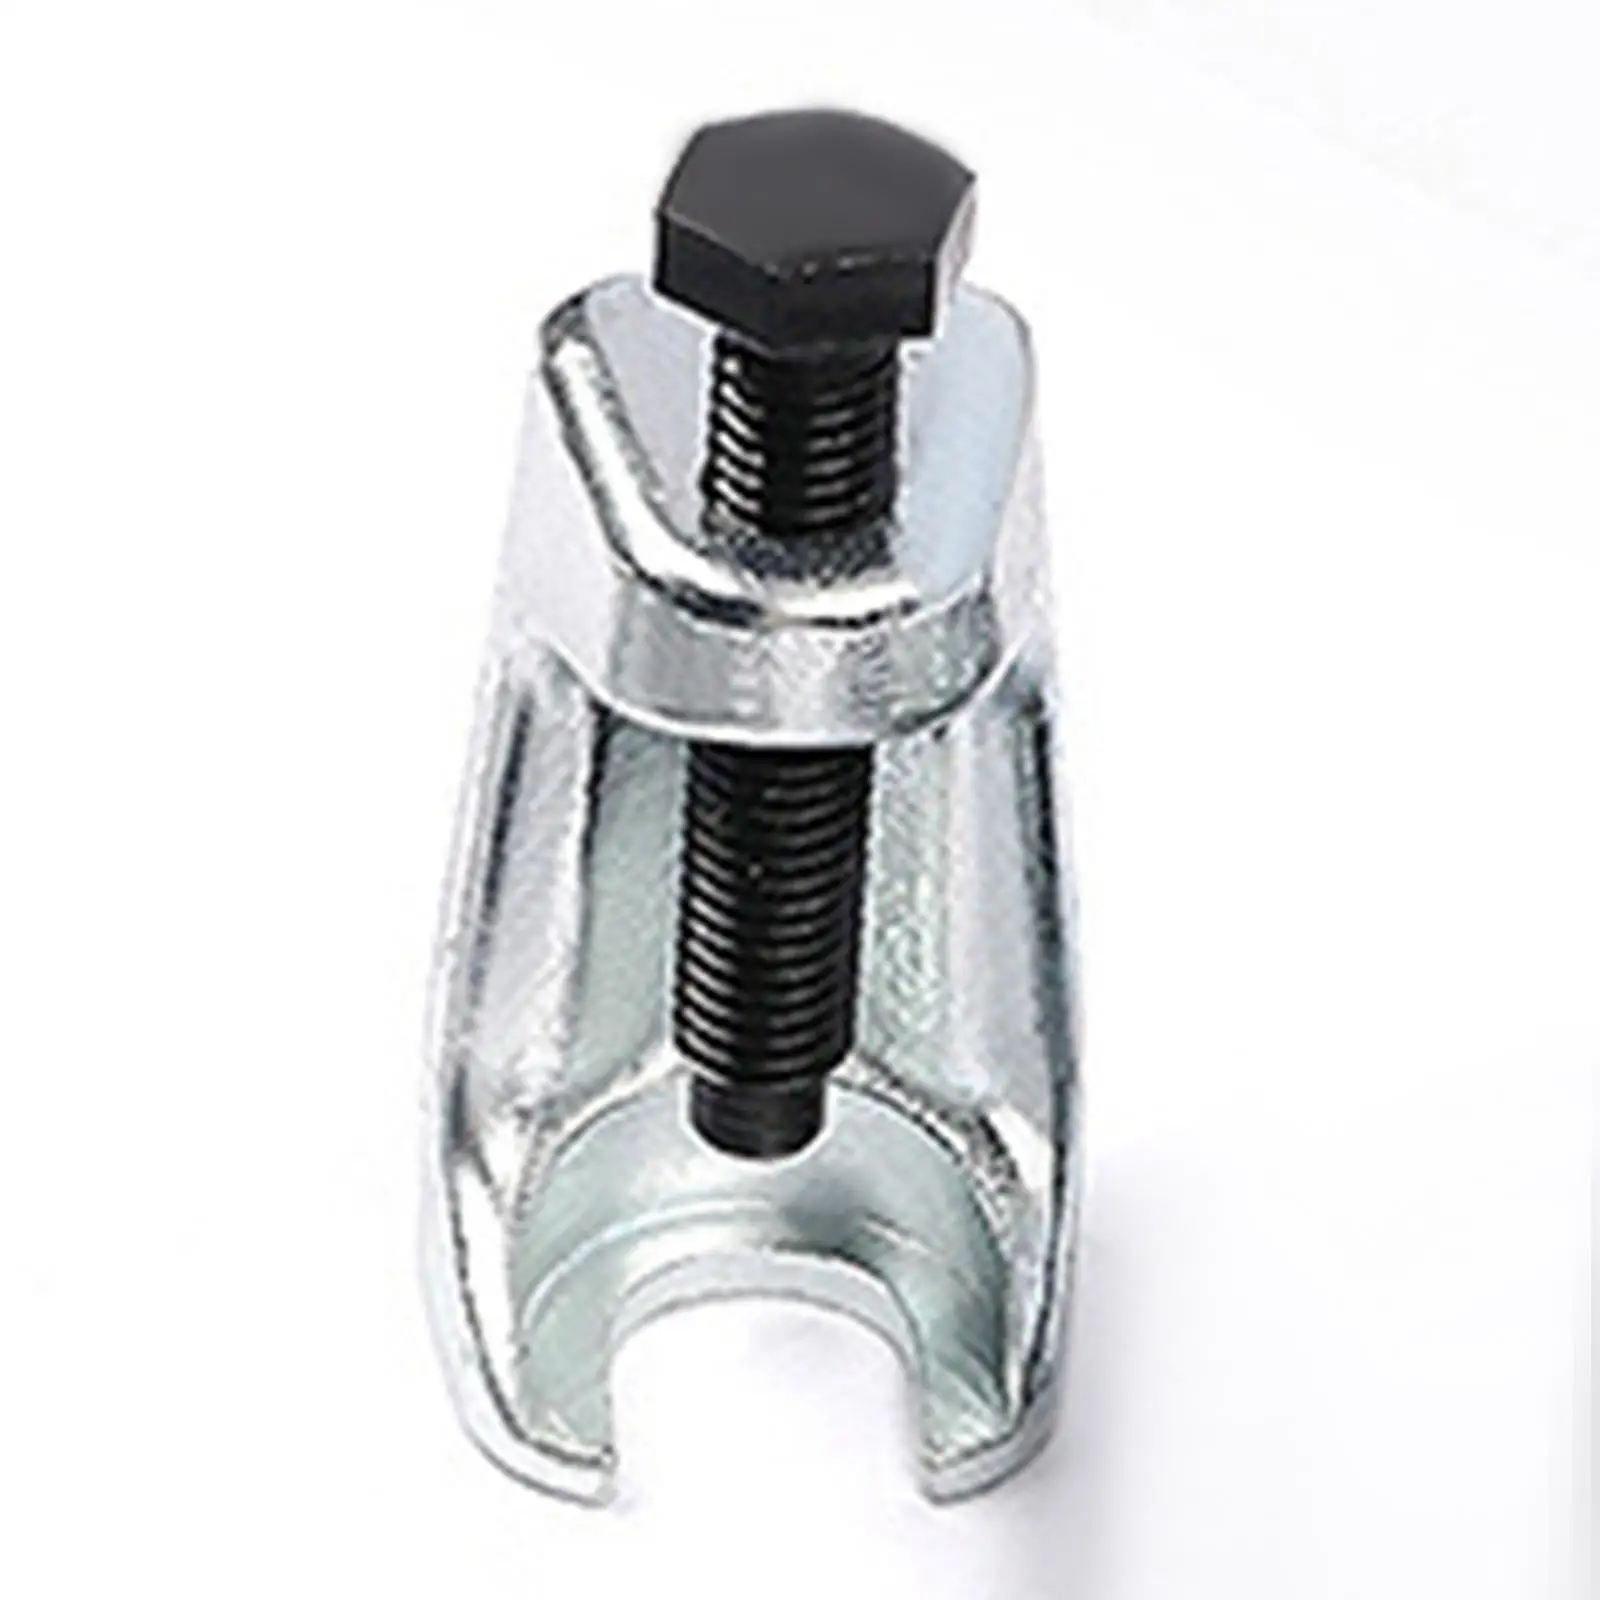 Car Ball Joint Separator, Tie Rod End Puller Steel Splitter Removal Tool for